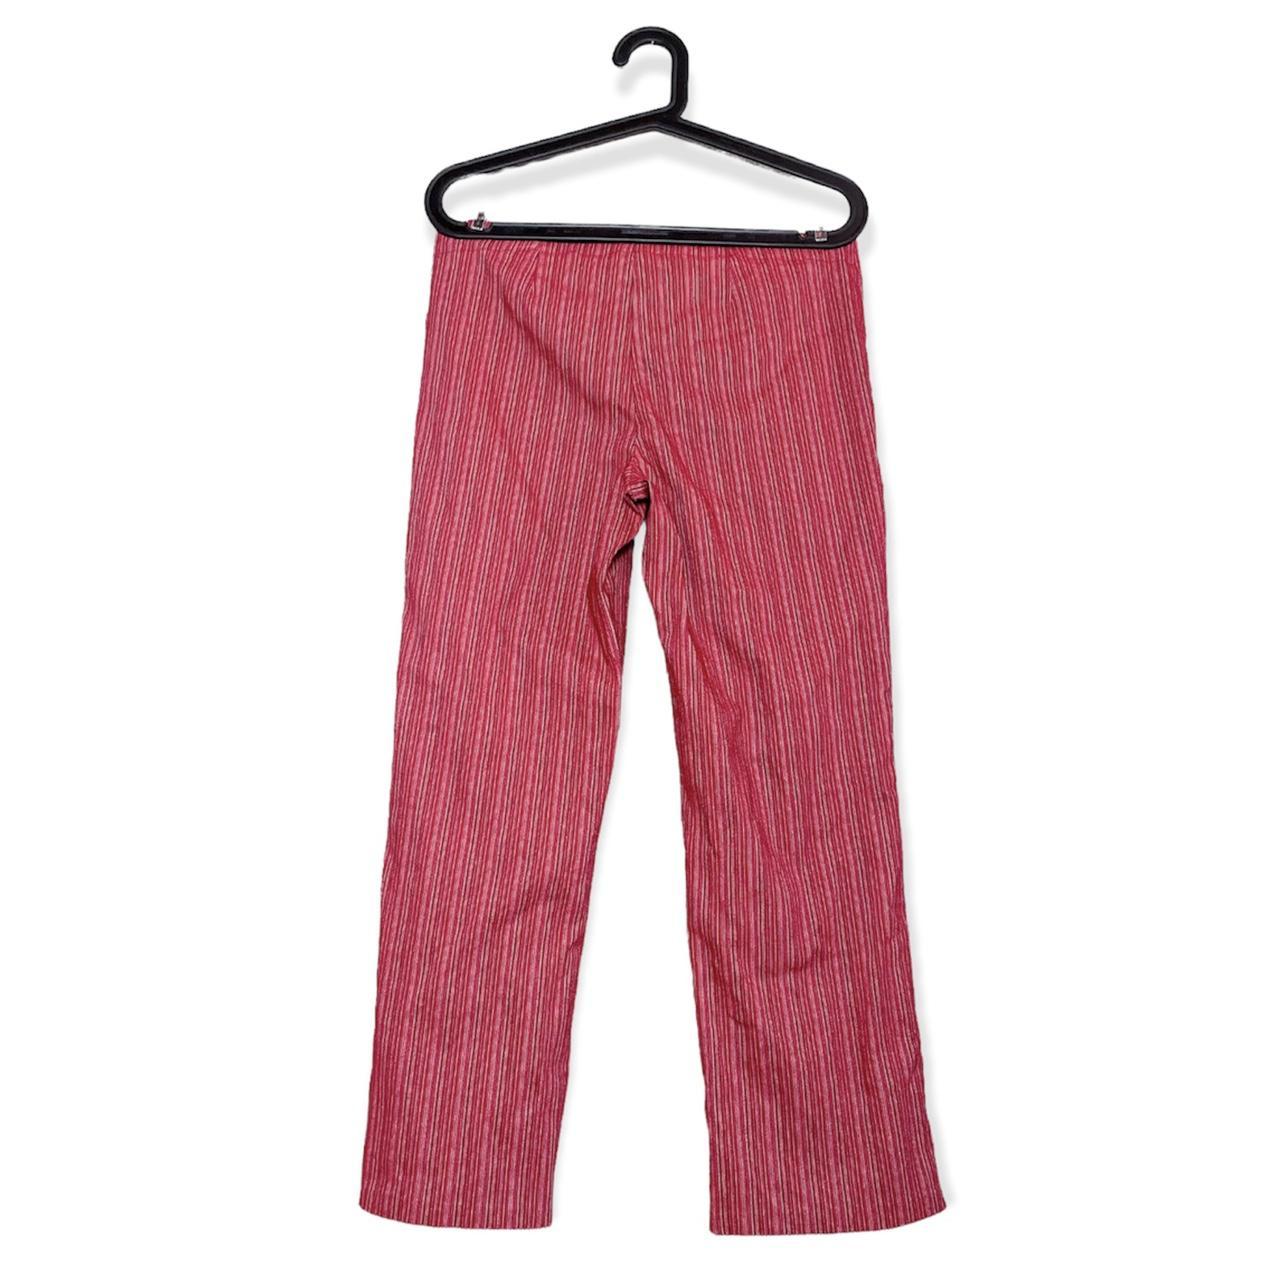 Hype Women's Red Trousers (2)